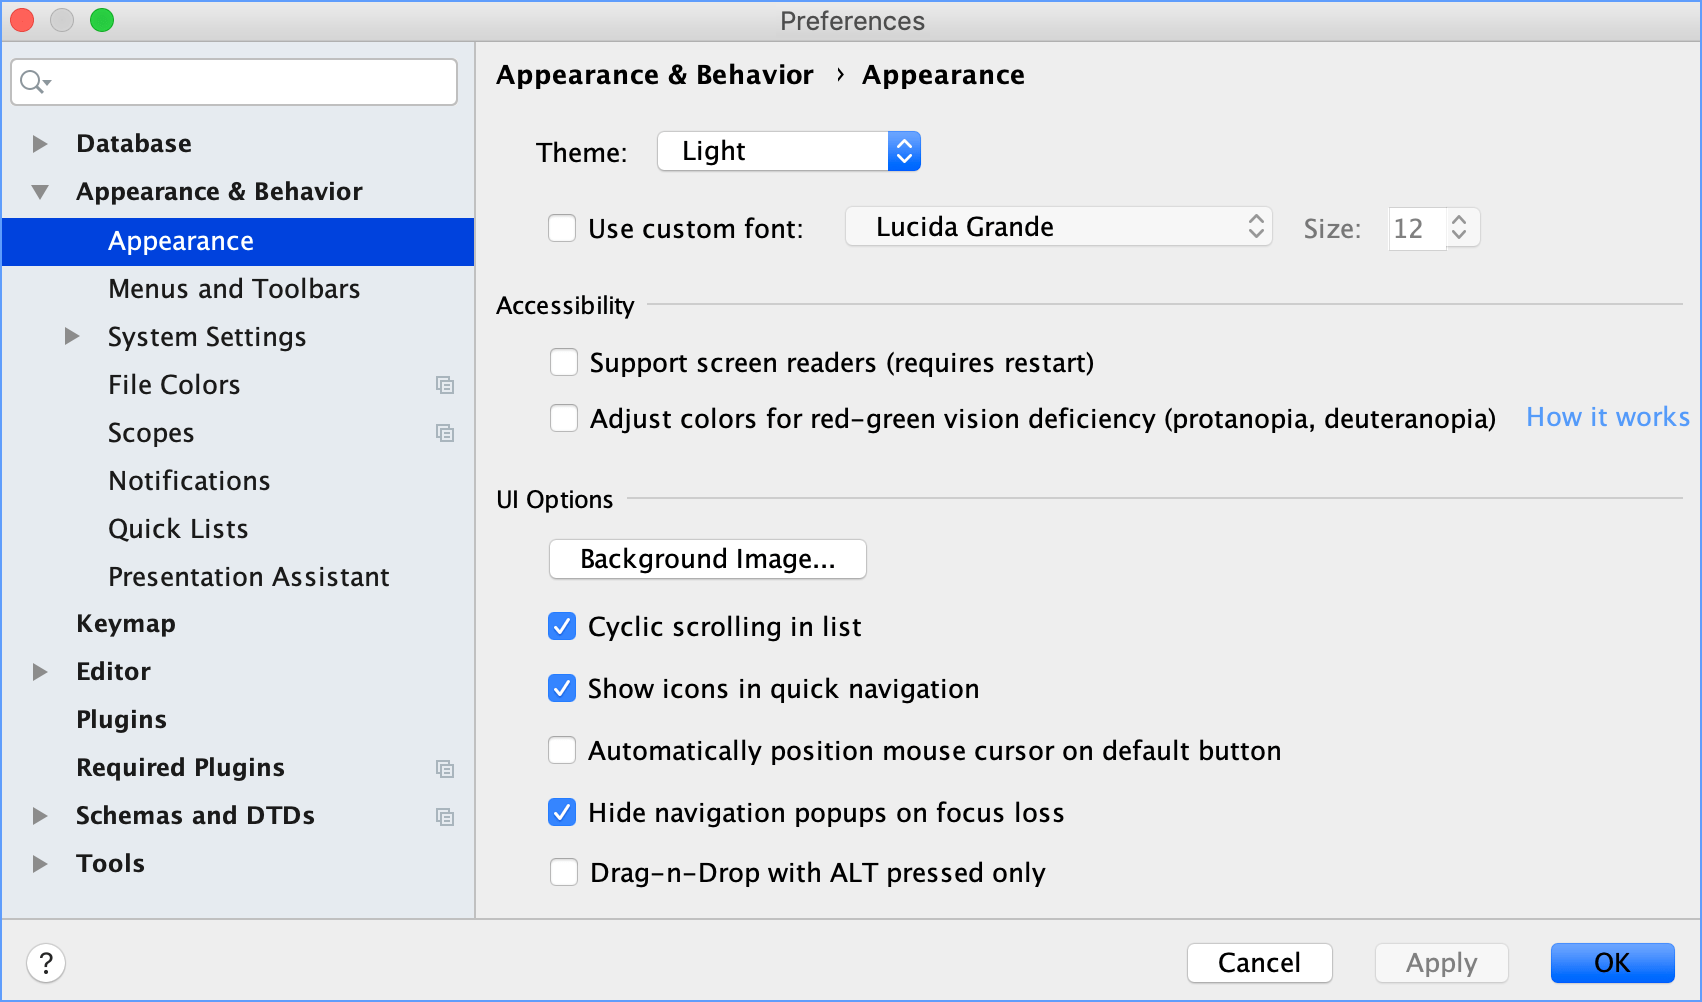 The Background Image button in Appearance preferences